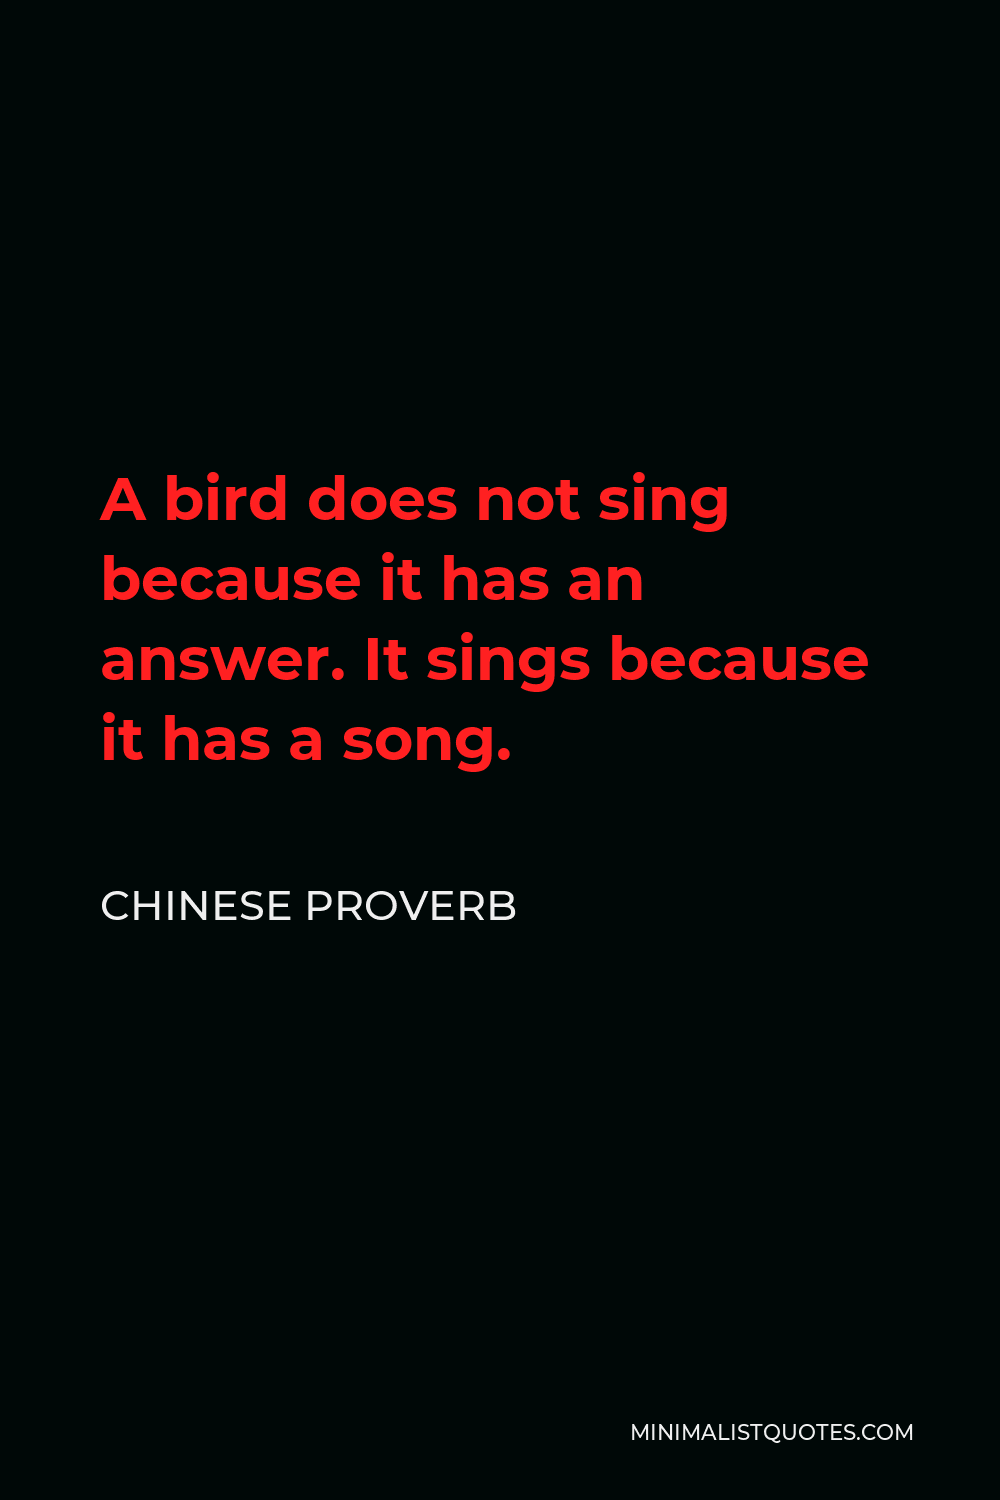 Chinese Proverb Quote - A bird does not sing because it has an answer. It sings because it has a song.